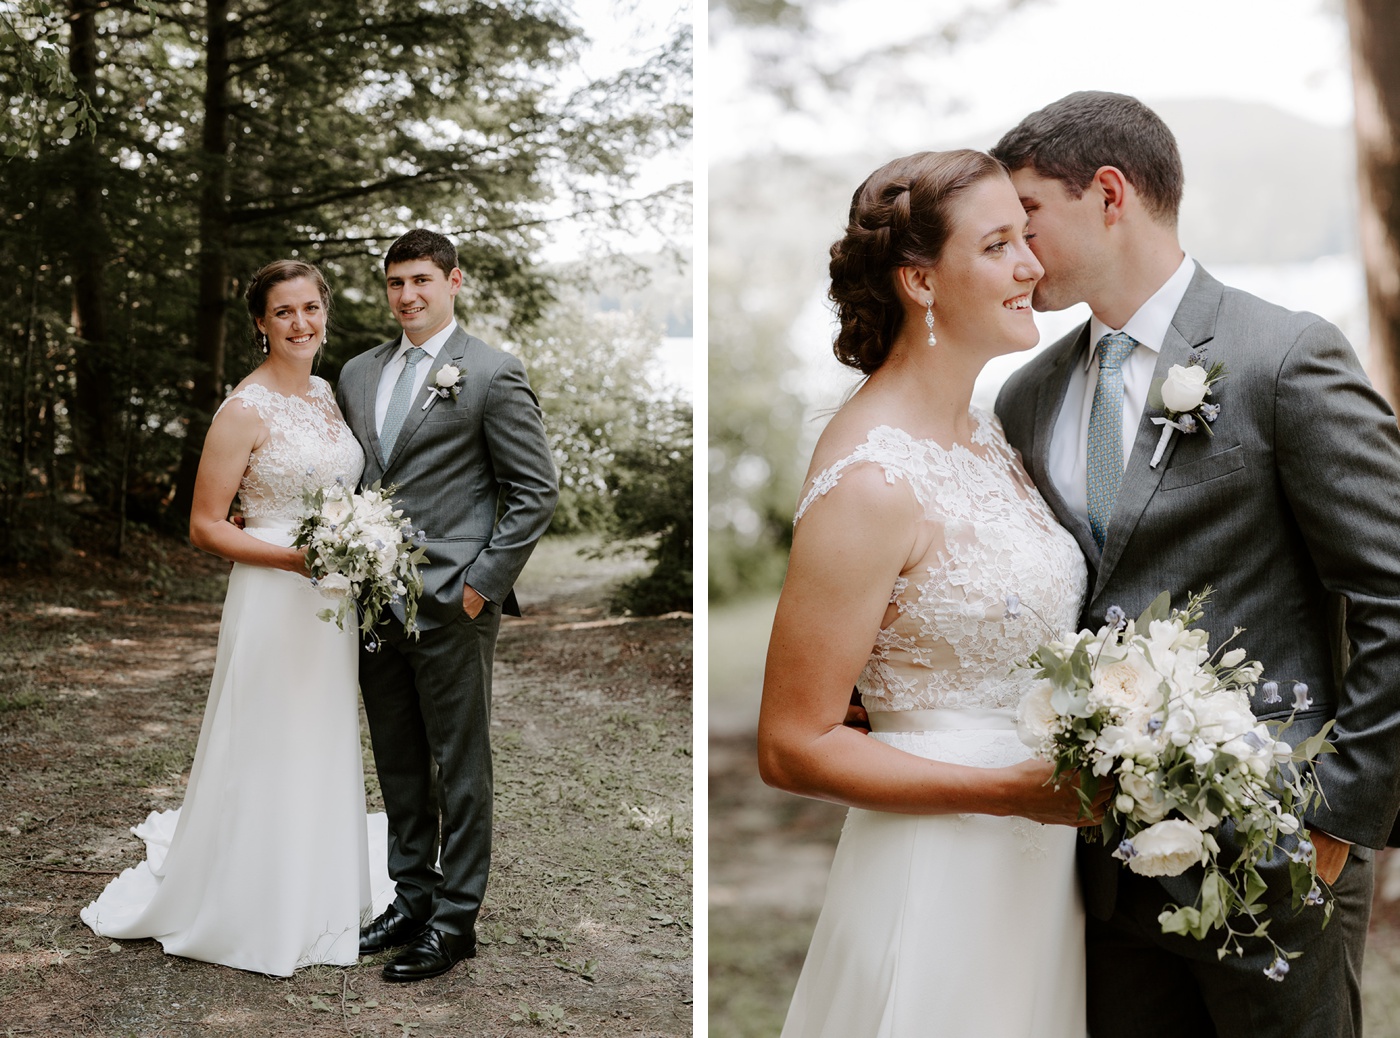 Bridal portraits at a private lake property in New Hampshire